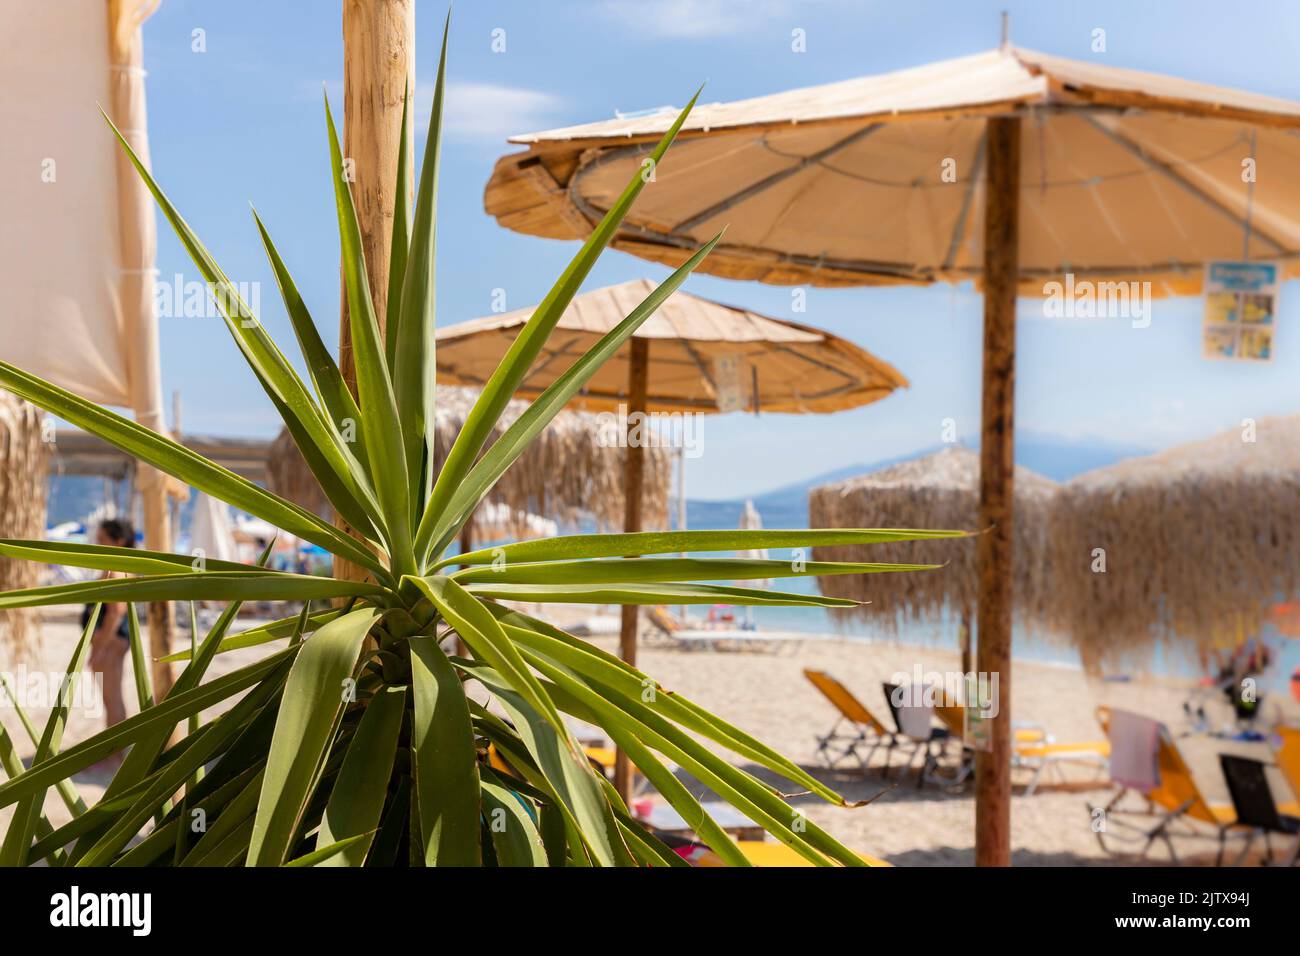 Decorative palm tree at the beach bar with umbrellas in the background. Stock Photo